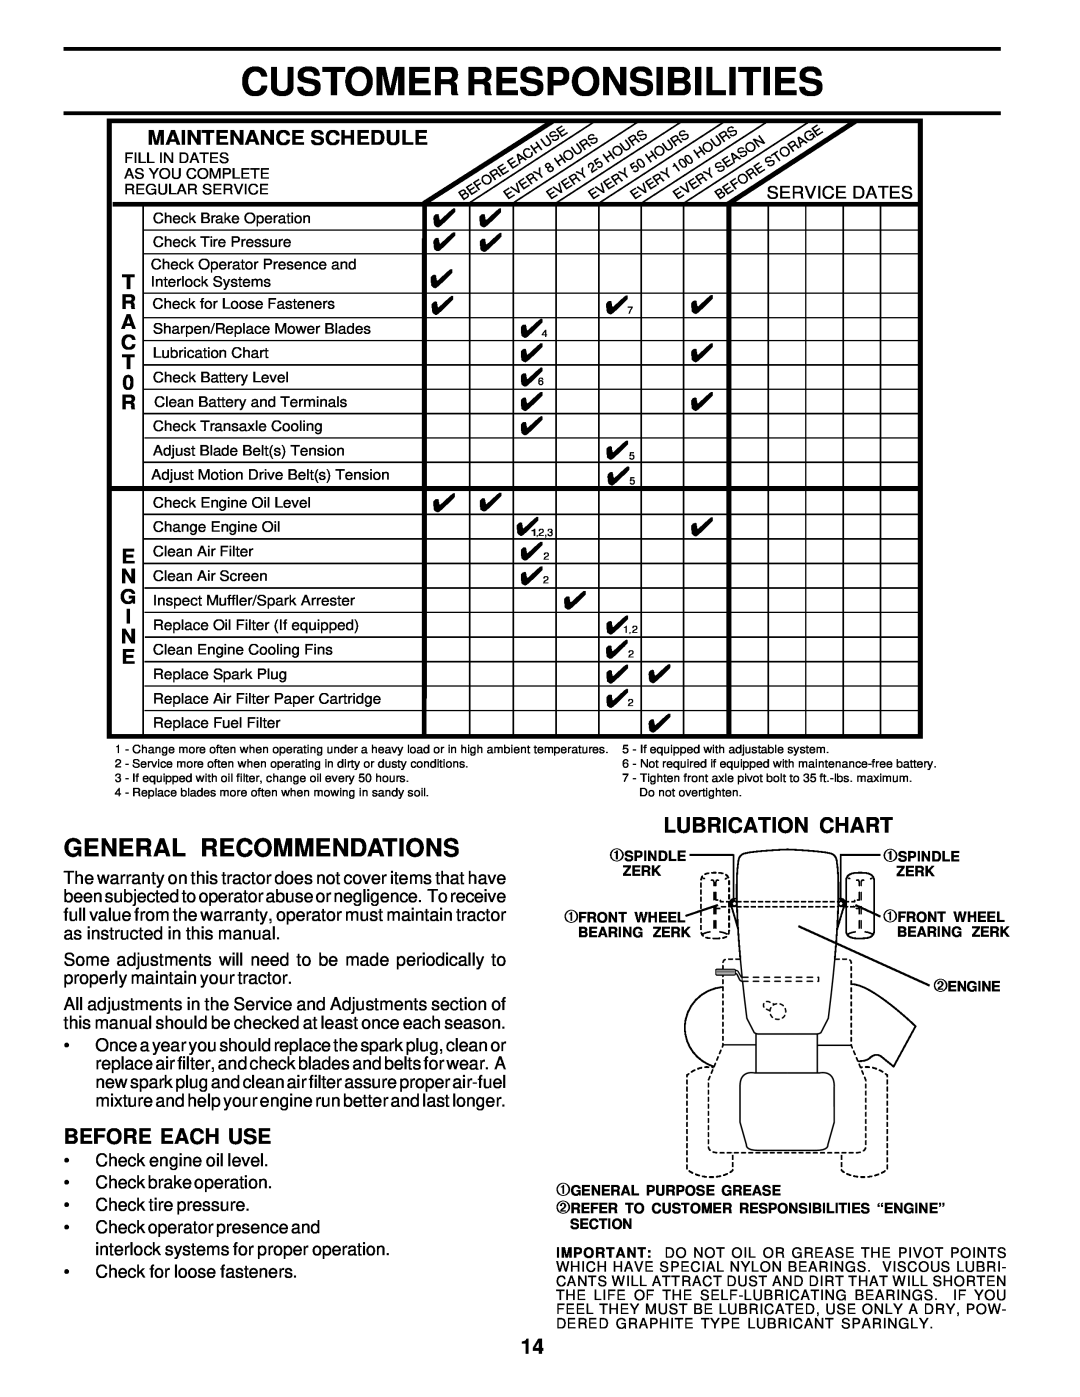 Weed Eater 177677 owner manual Customer Responsibilities, General Recommendations, Before Each Use, Lubrication Chart 